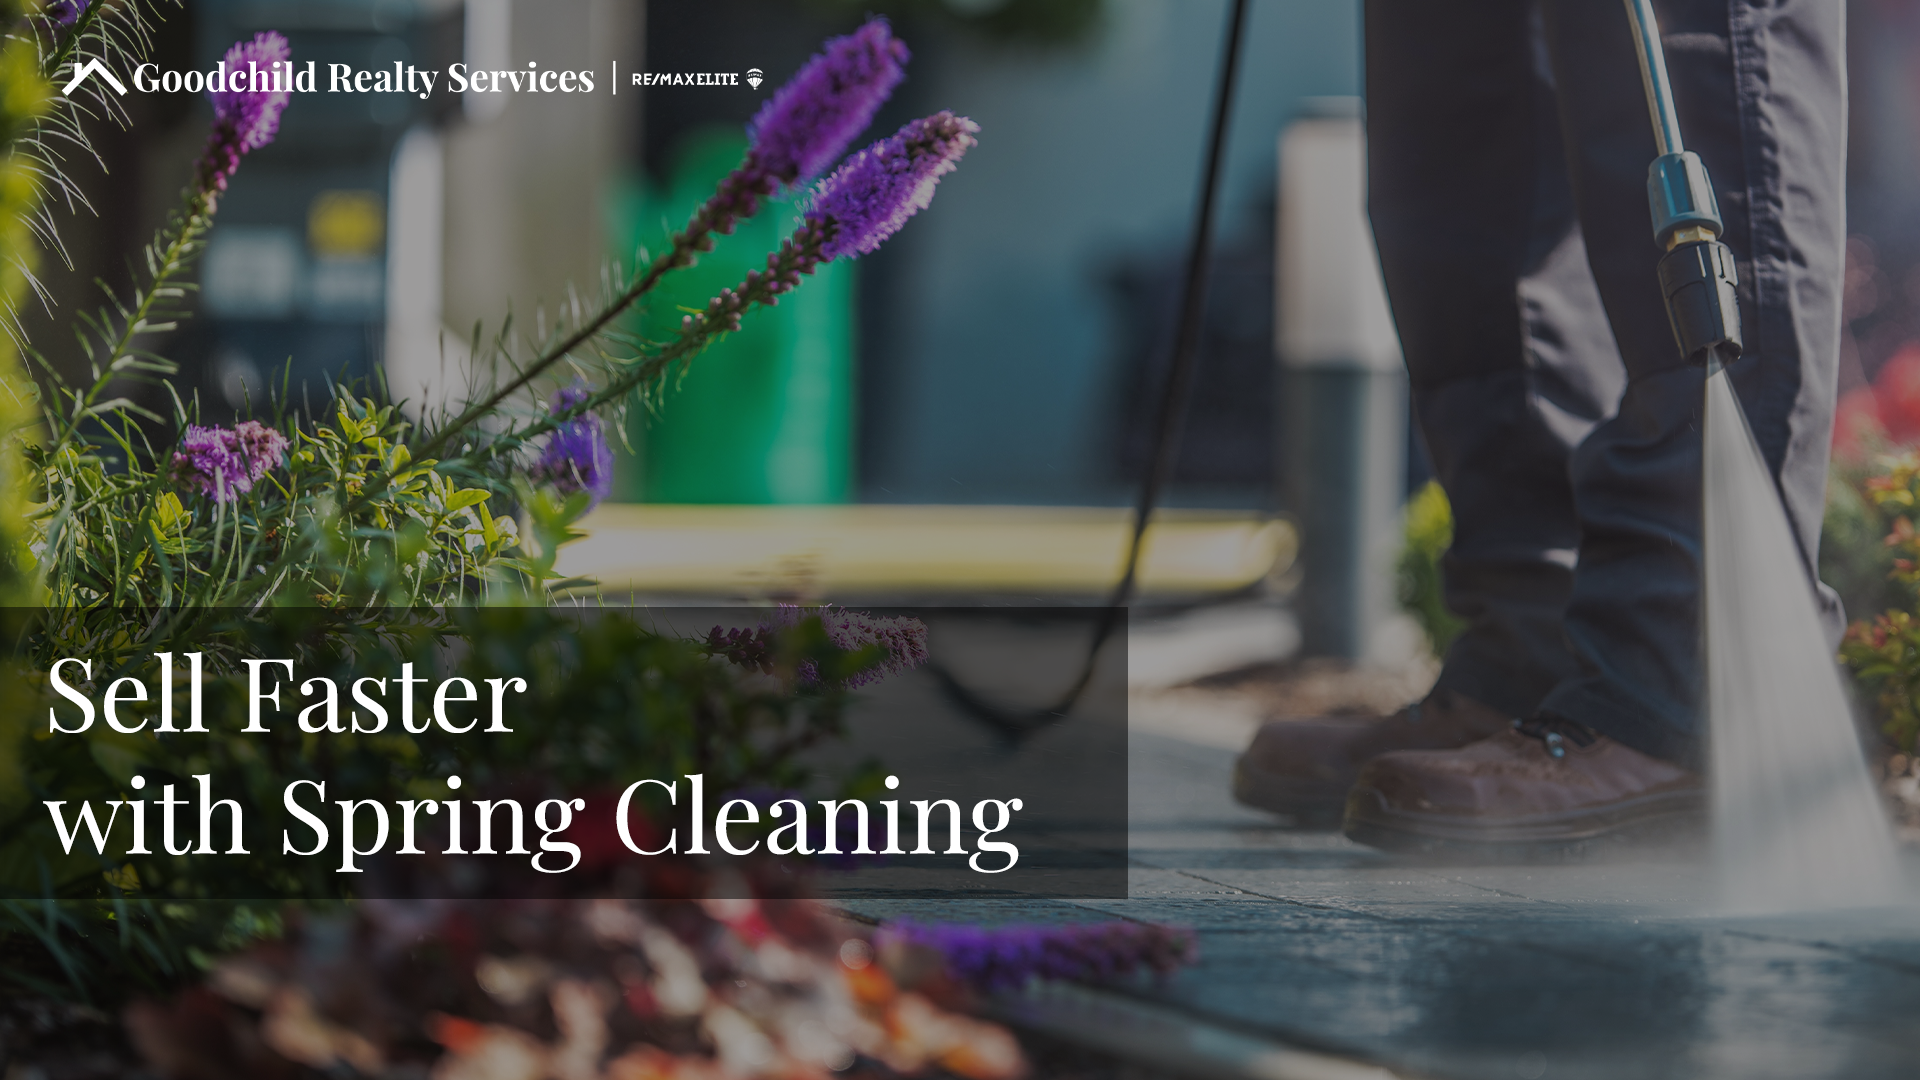 Sell Faster with Spring Cleaning